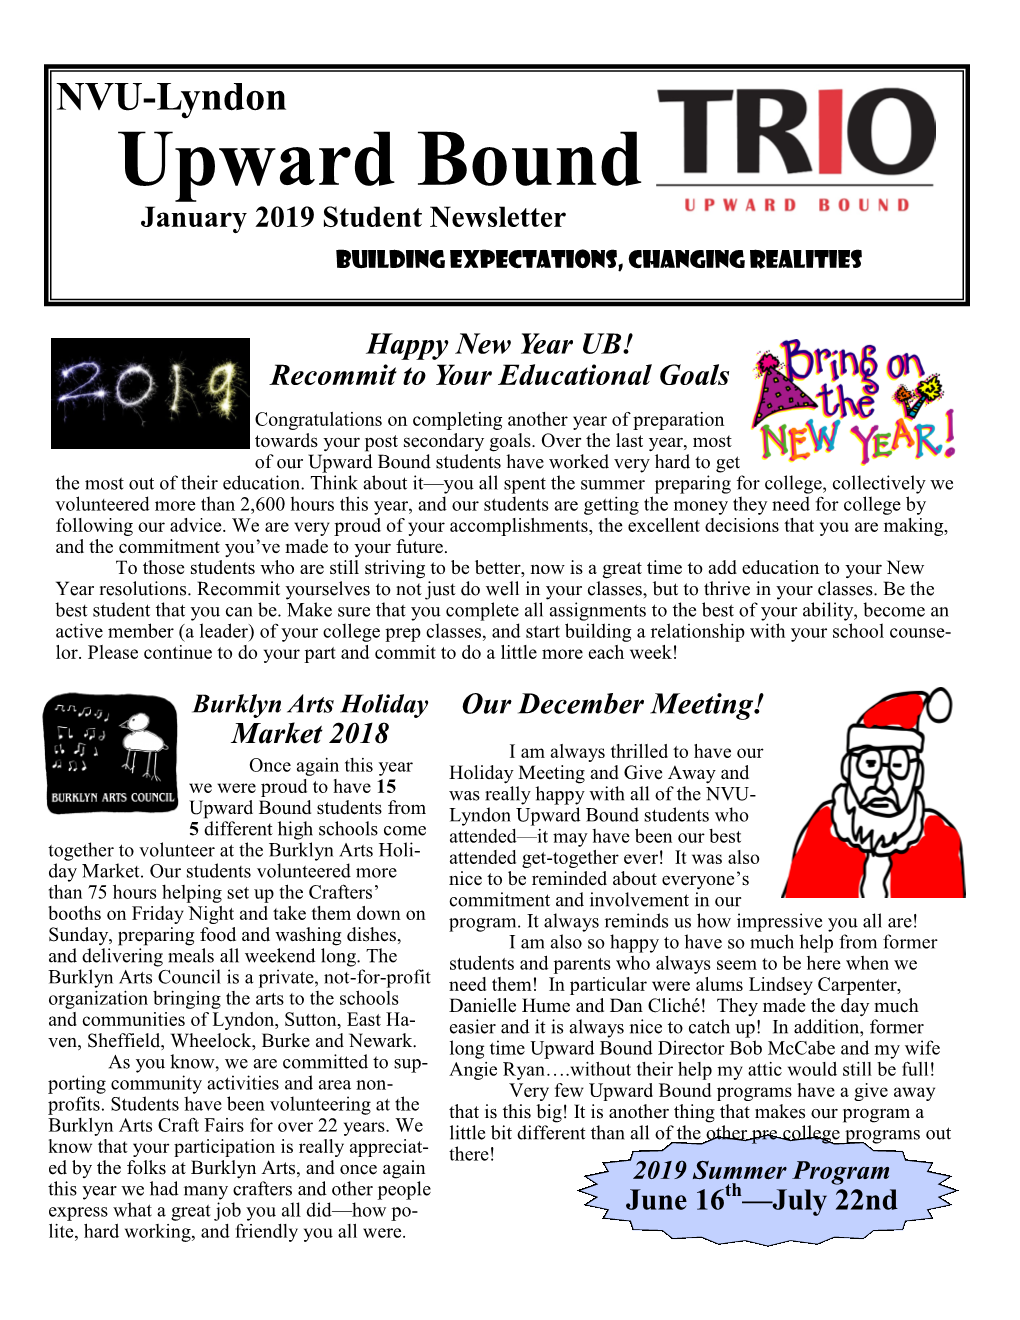 Upward Bound January 2019 Student Newsletter Building Expectations, Changing Realities